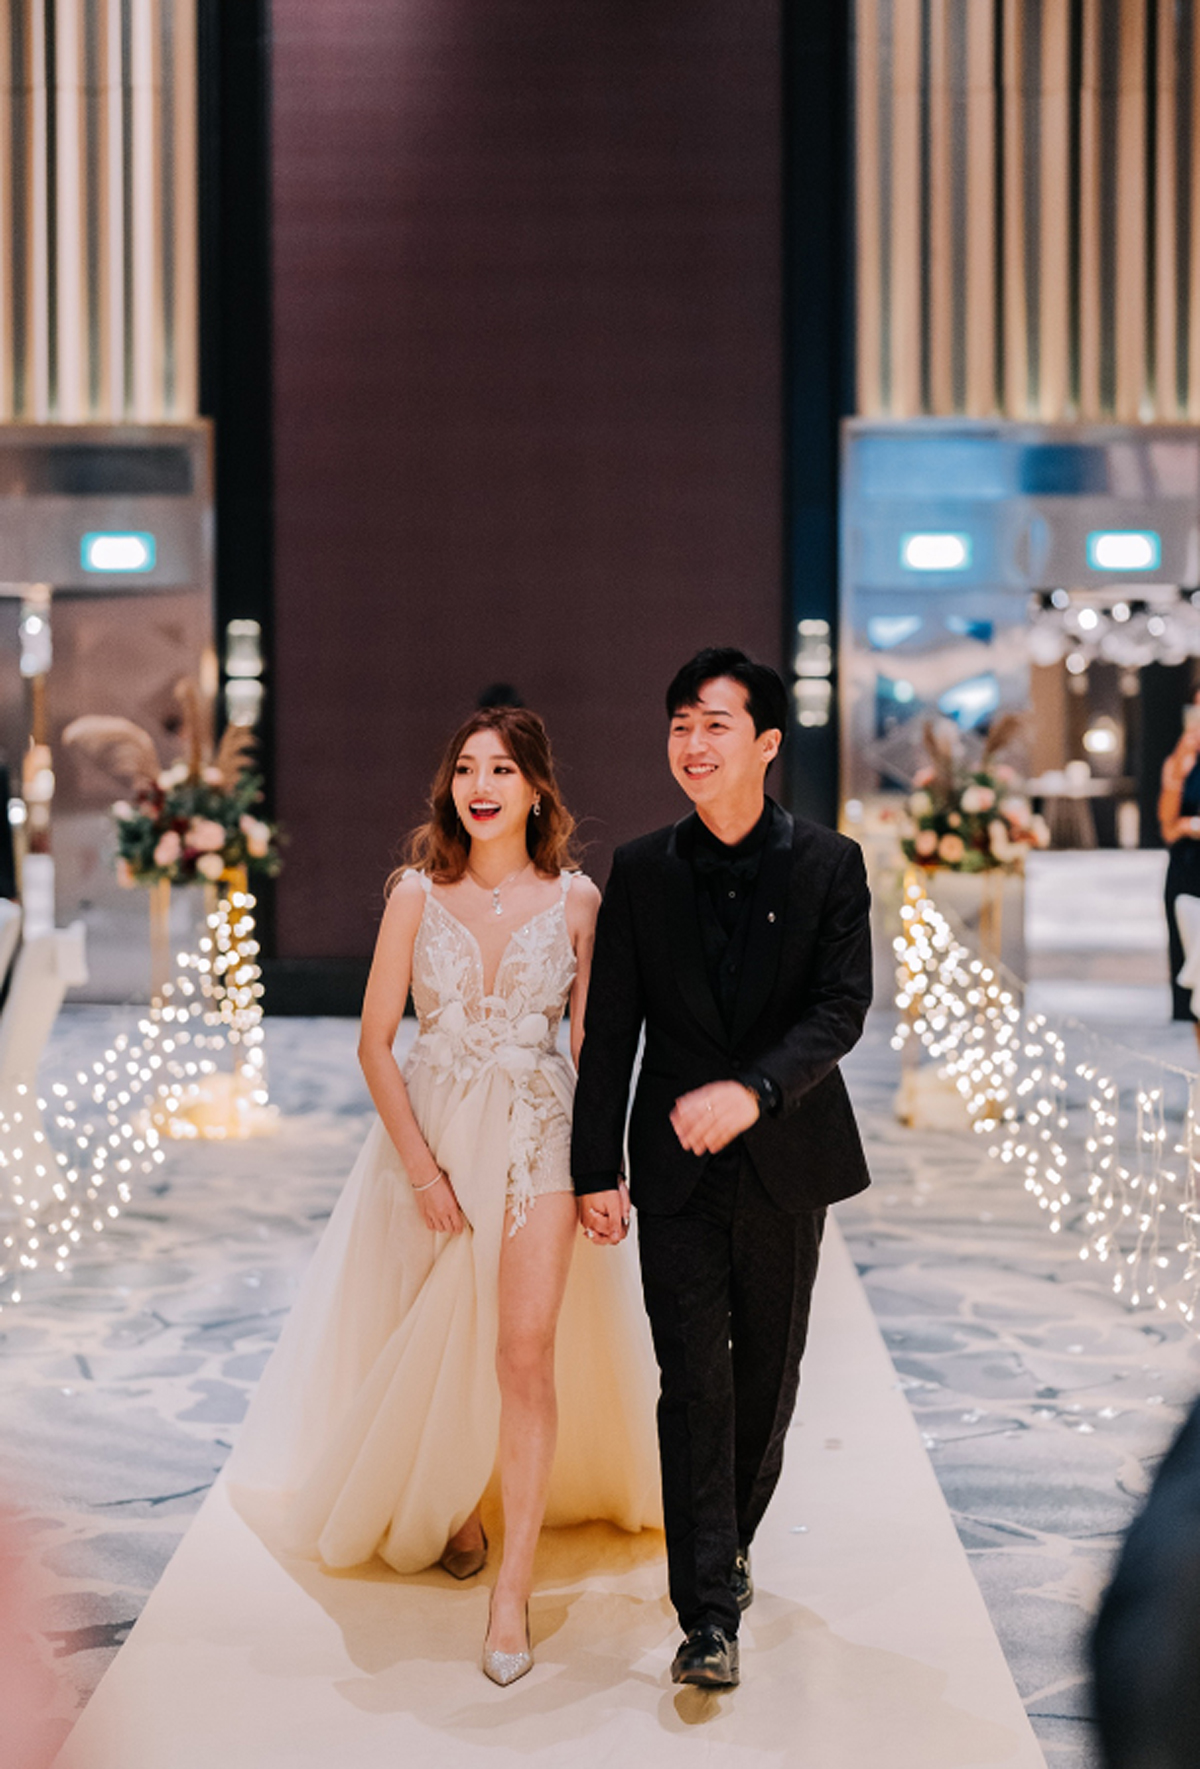 An Insider’s Wedding Scoop: Joanna Soh’s Personal Tips to Nail Your Wedding Day